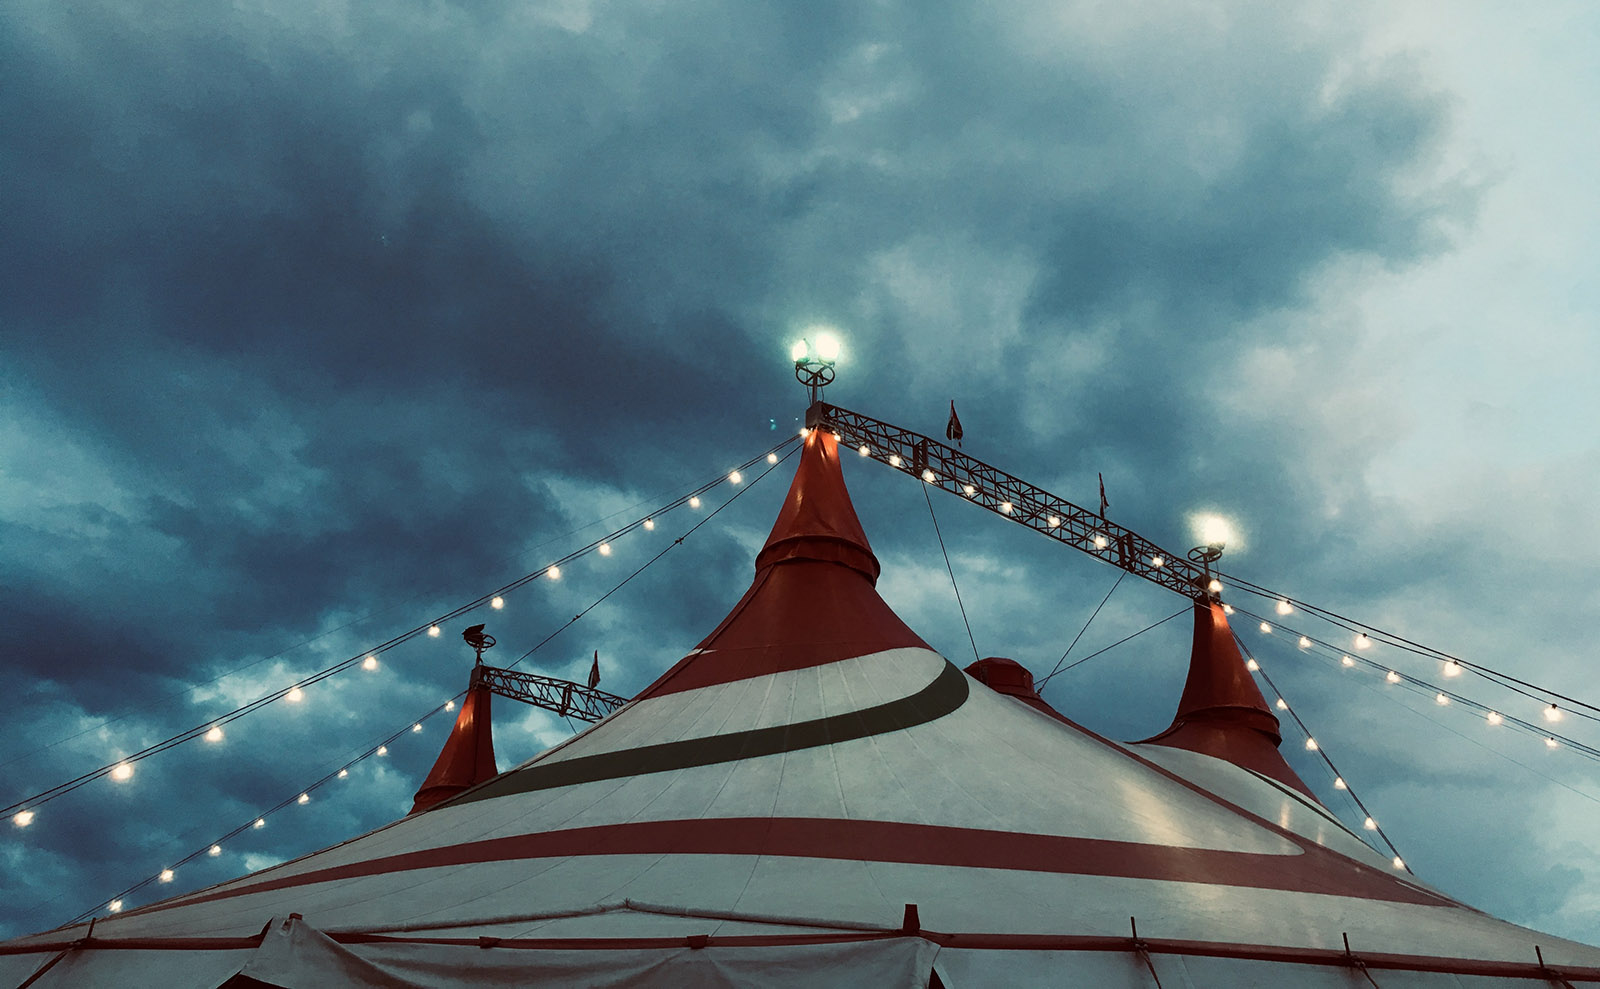 stormy night sky with a striped circus tent.